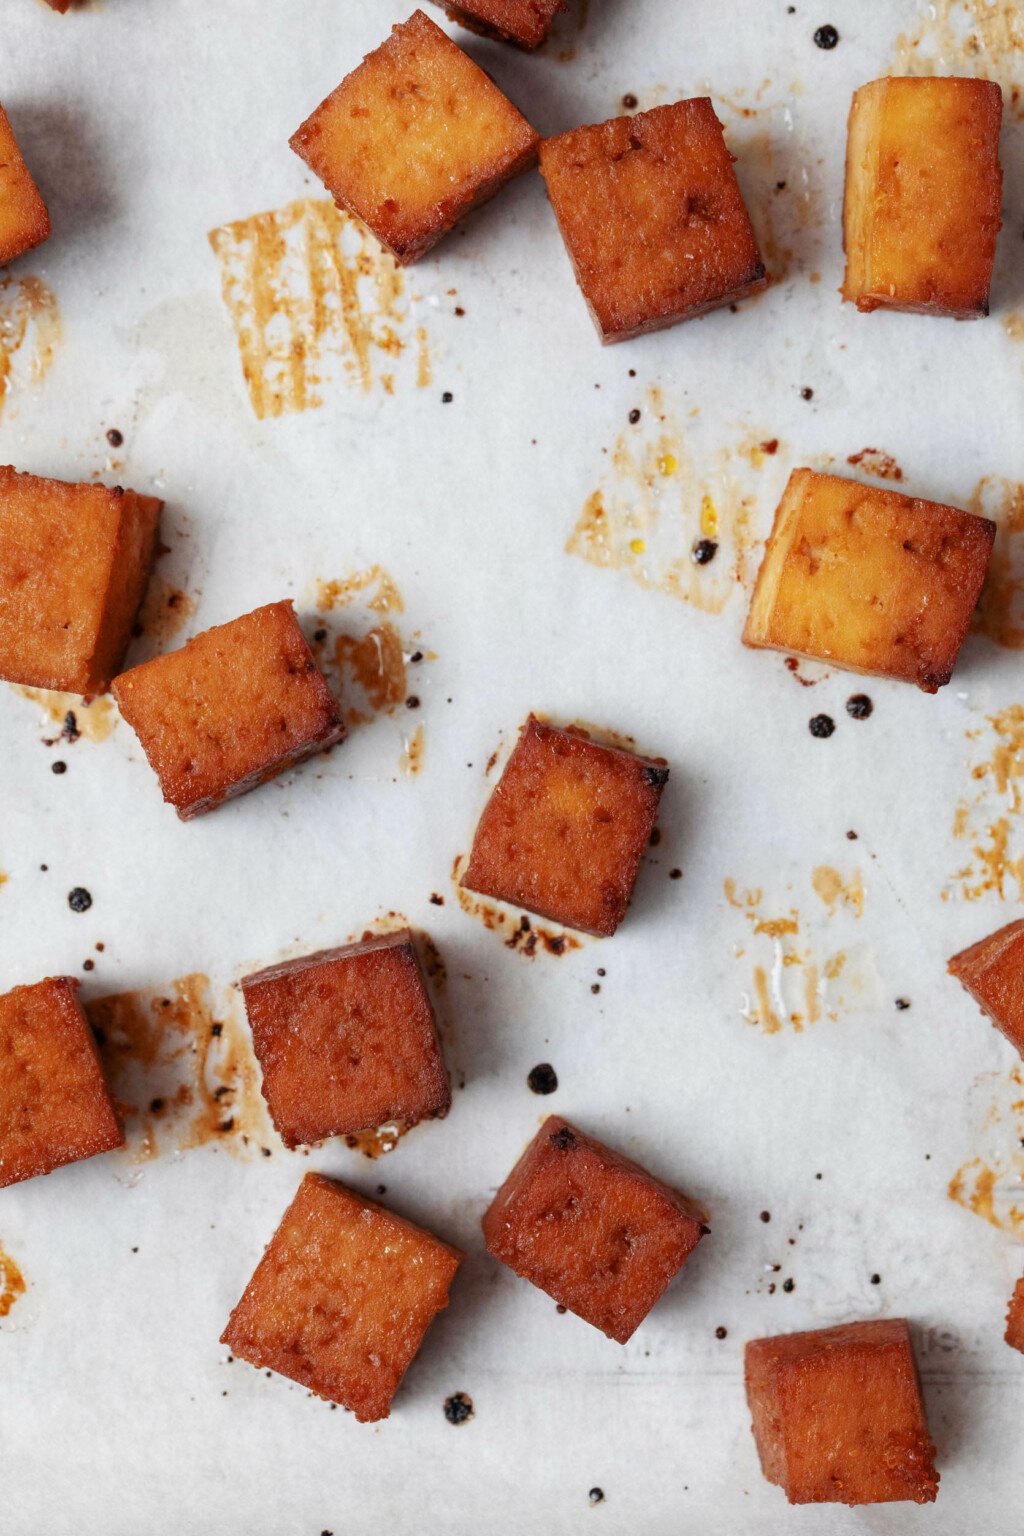 Teriyaki seasoned tofu cubes have just been baked and are emerging from the oven with crispy edges.